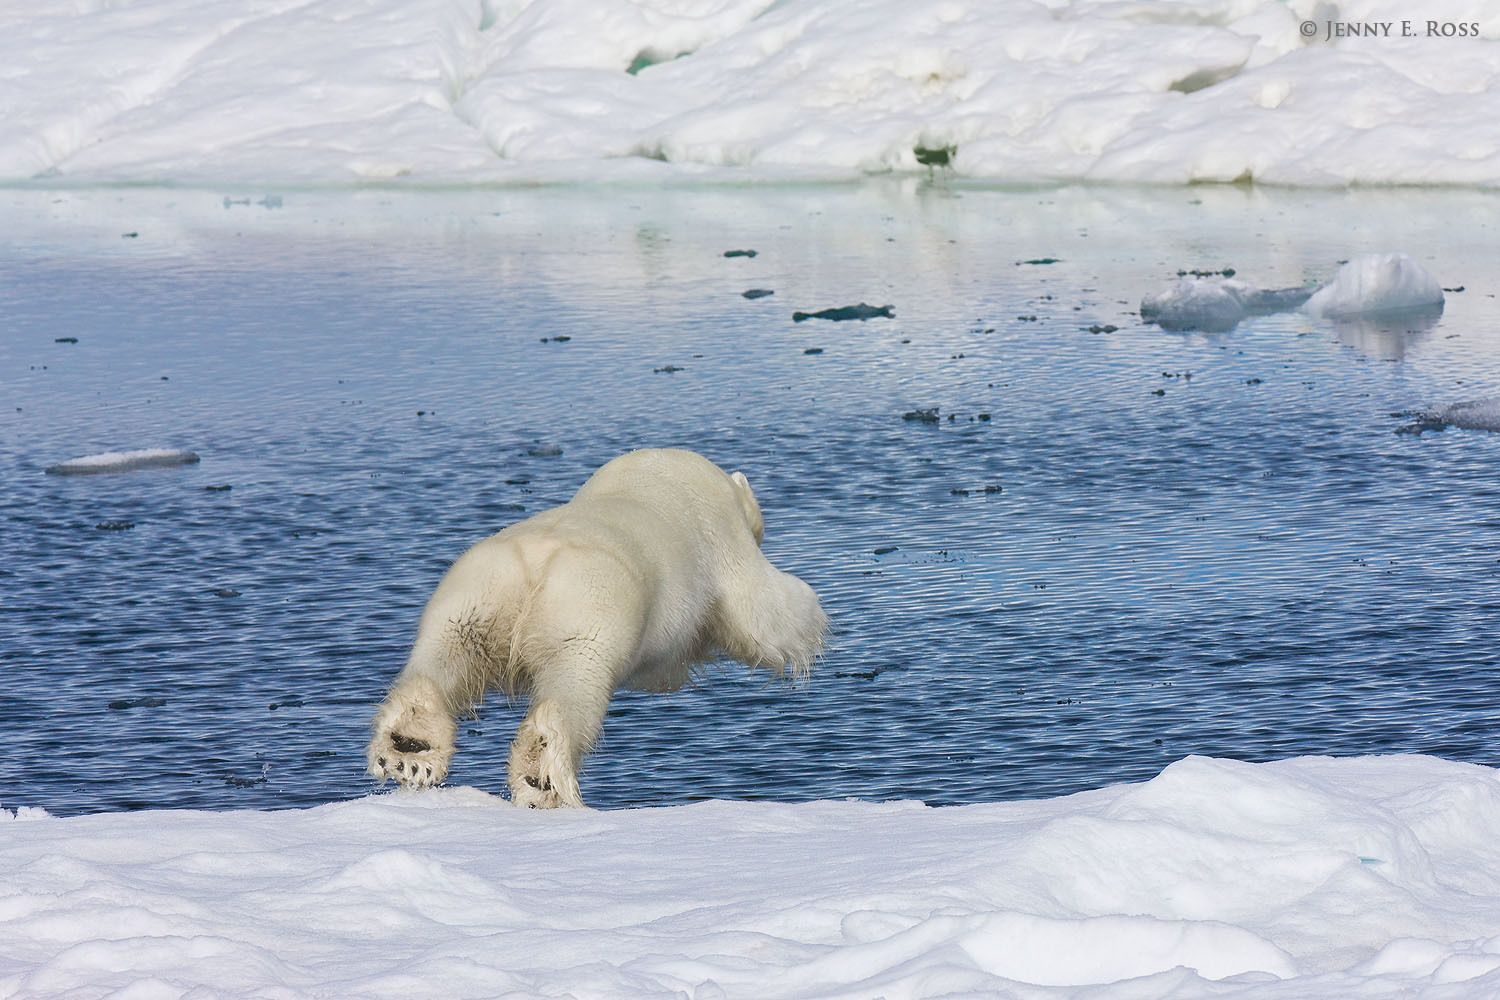 A subadult male polar bear (Ursus maritimus) dives from the edge of the sea ice into an open lead between floes.